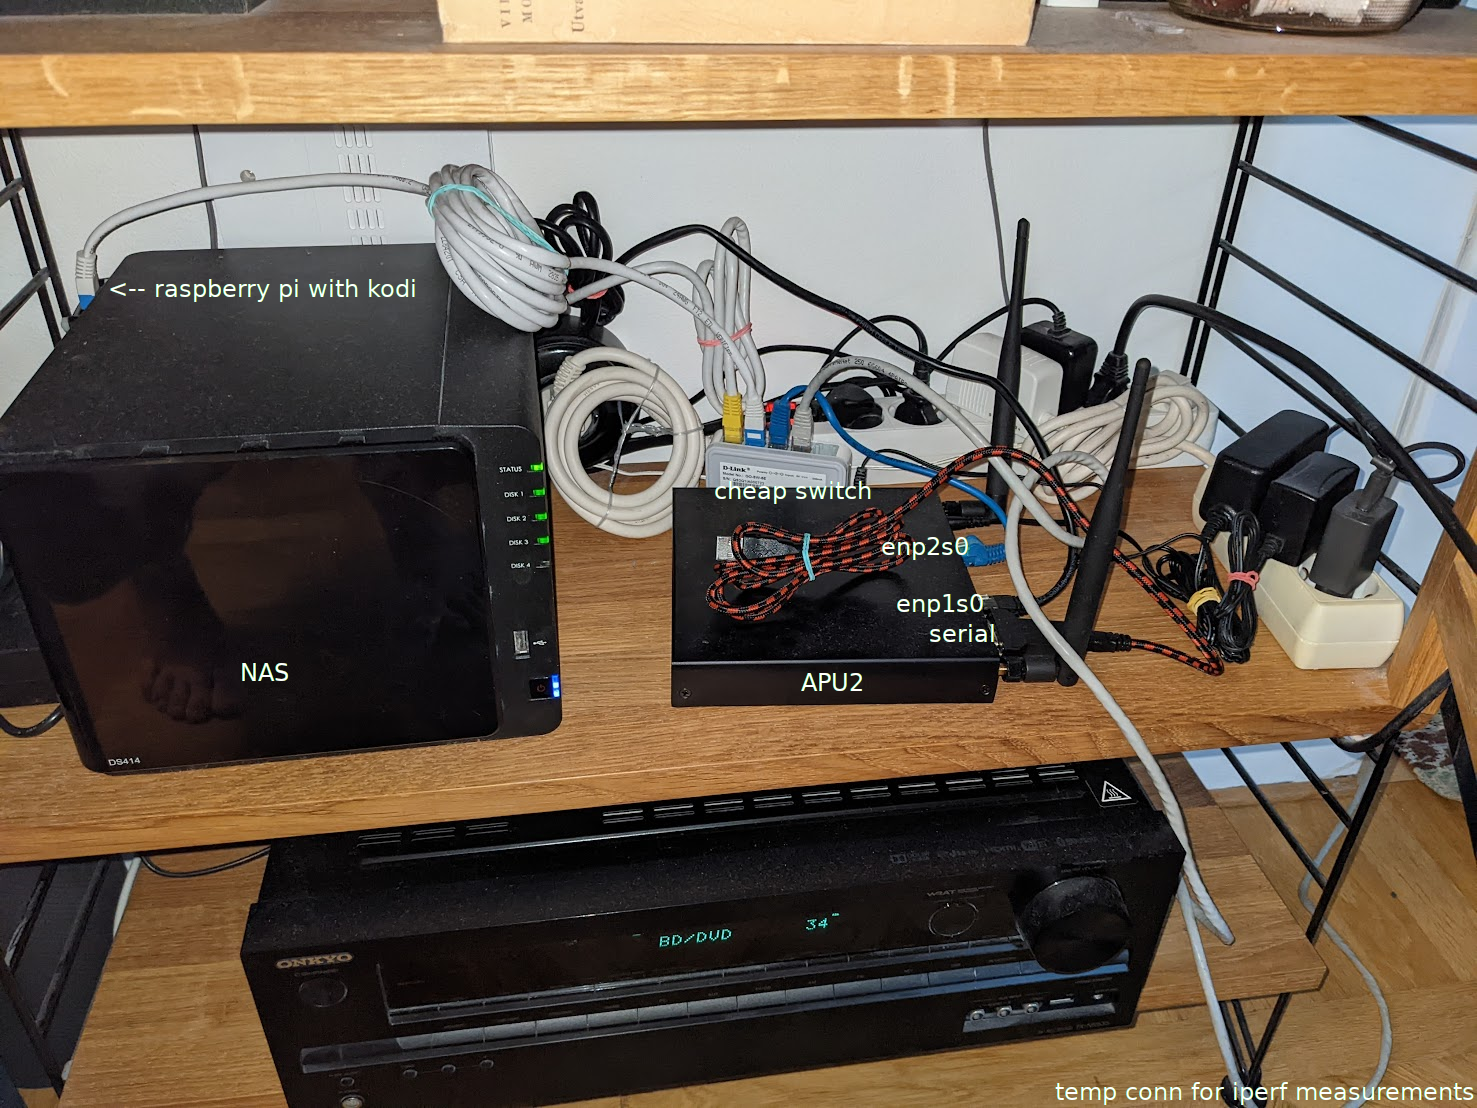 Picture of the router setup